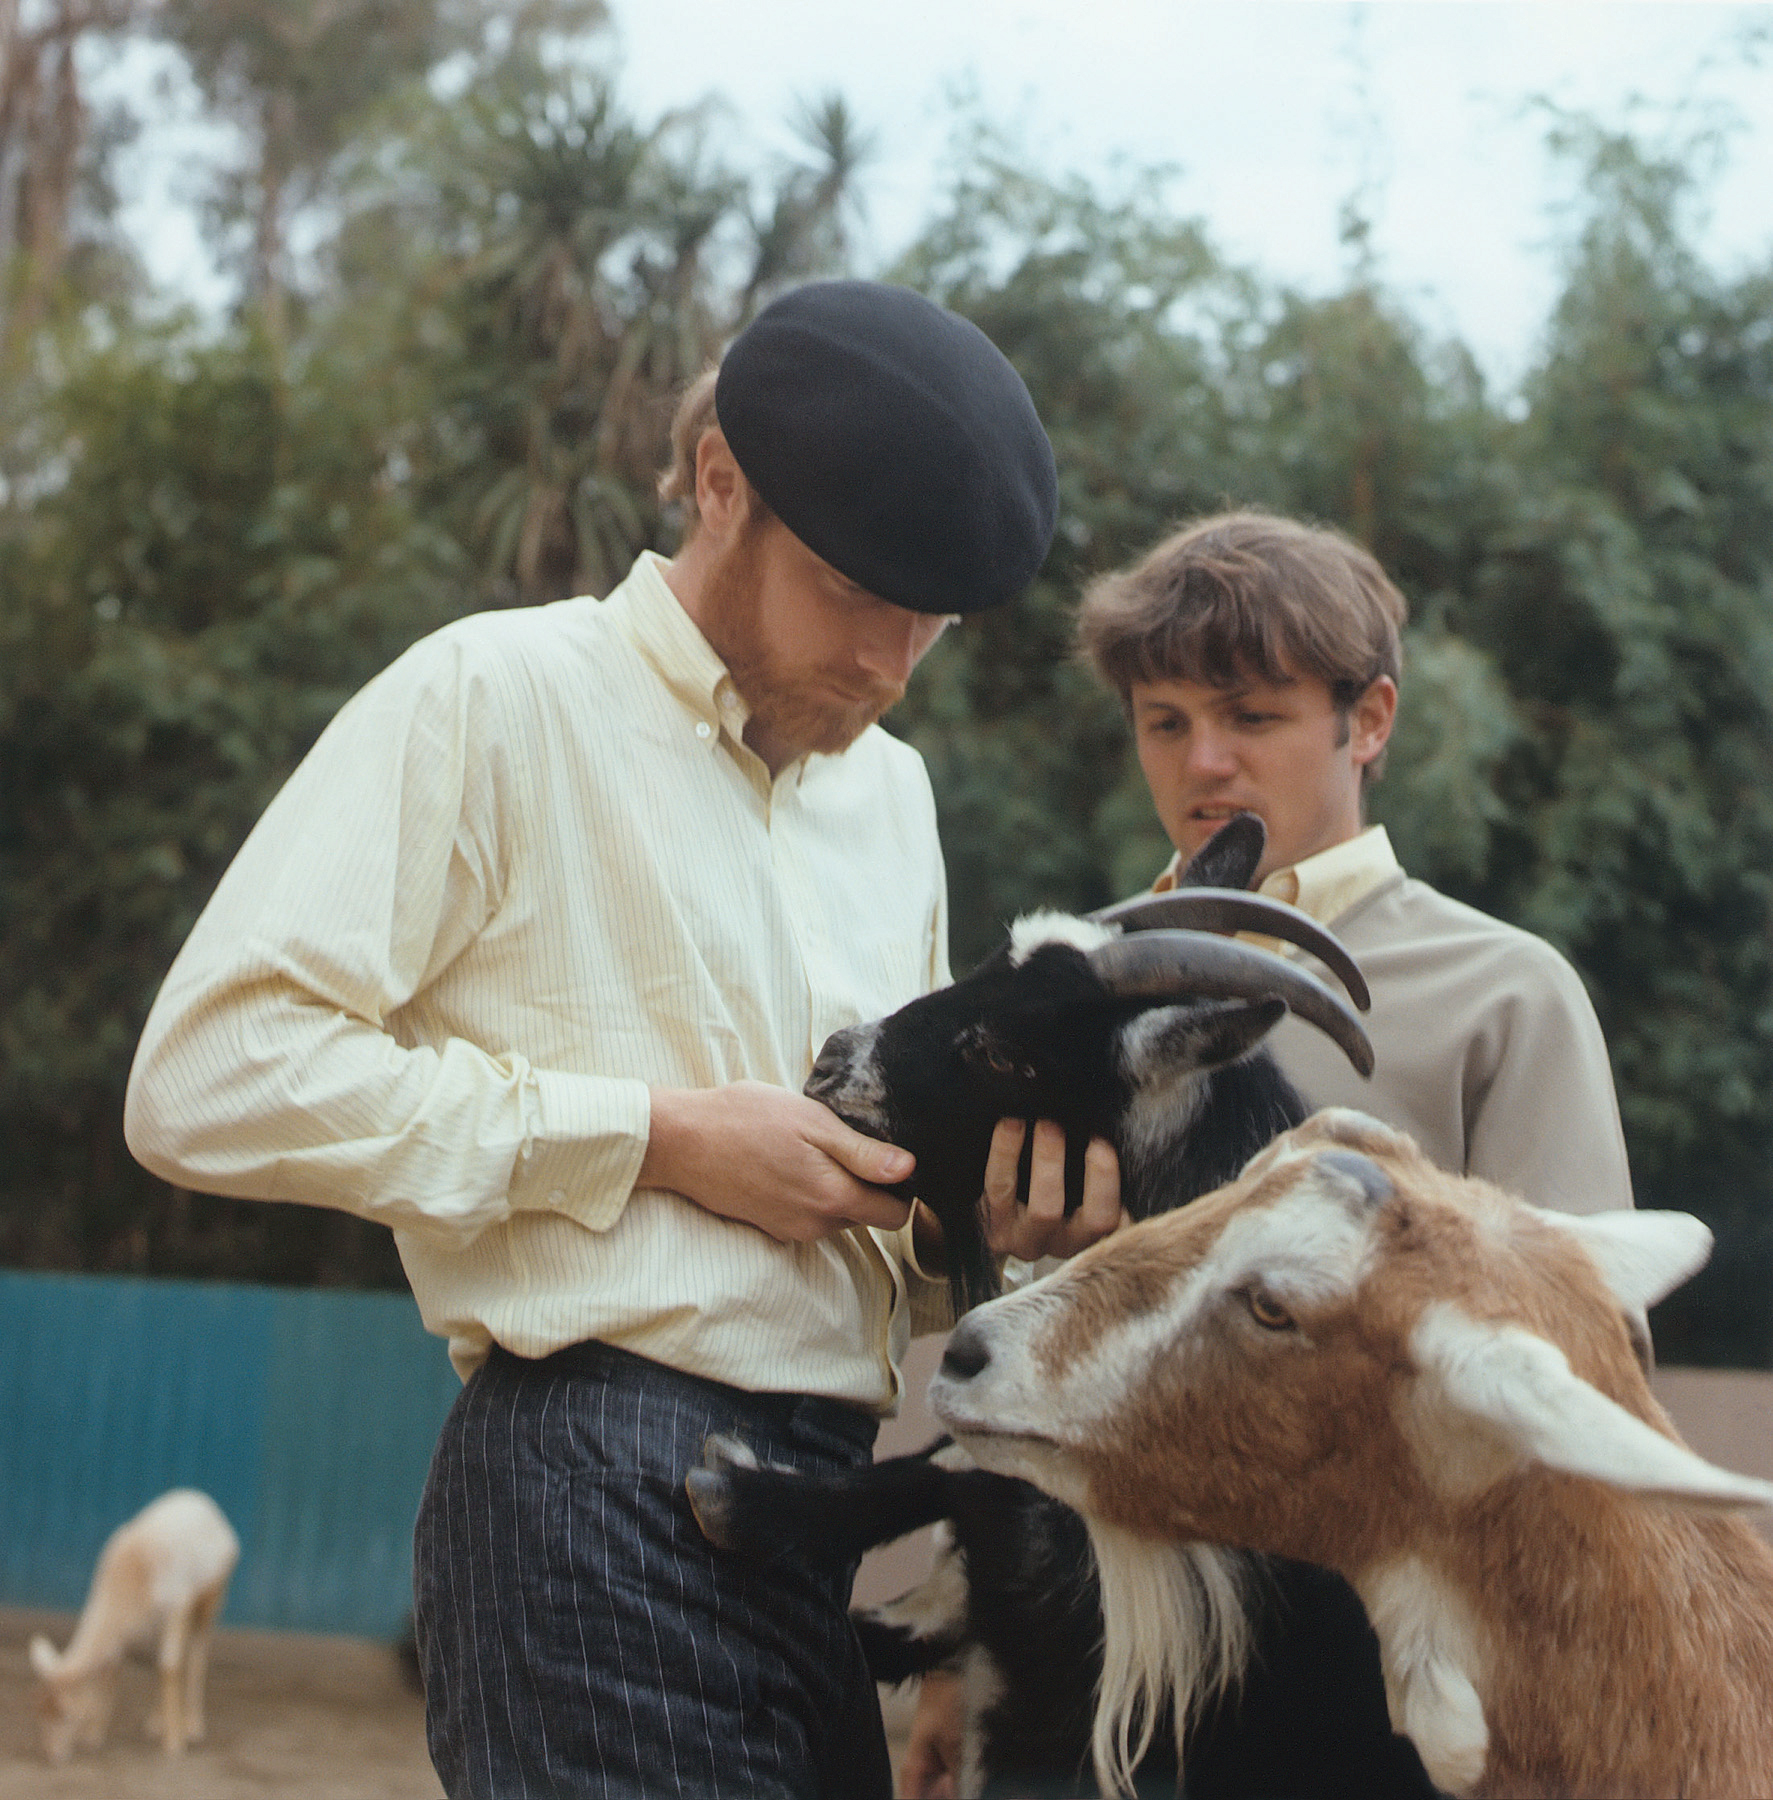 The Beach Boys' Pet Sounds photo shoot by George Jerman at San Diego Zoo, California, in February 1966.